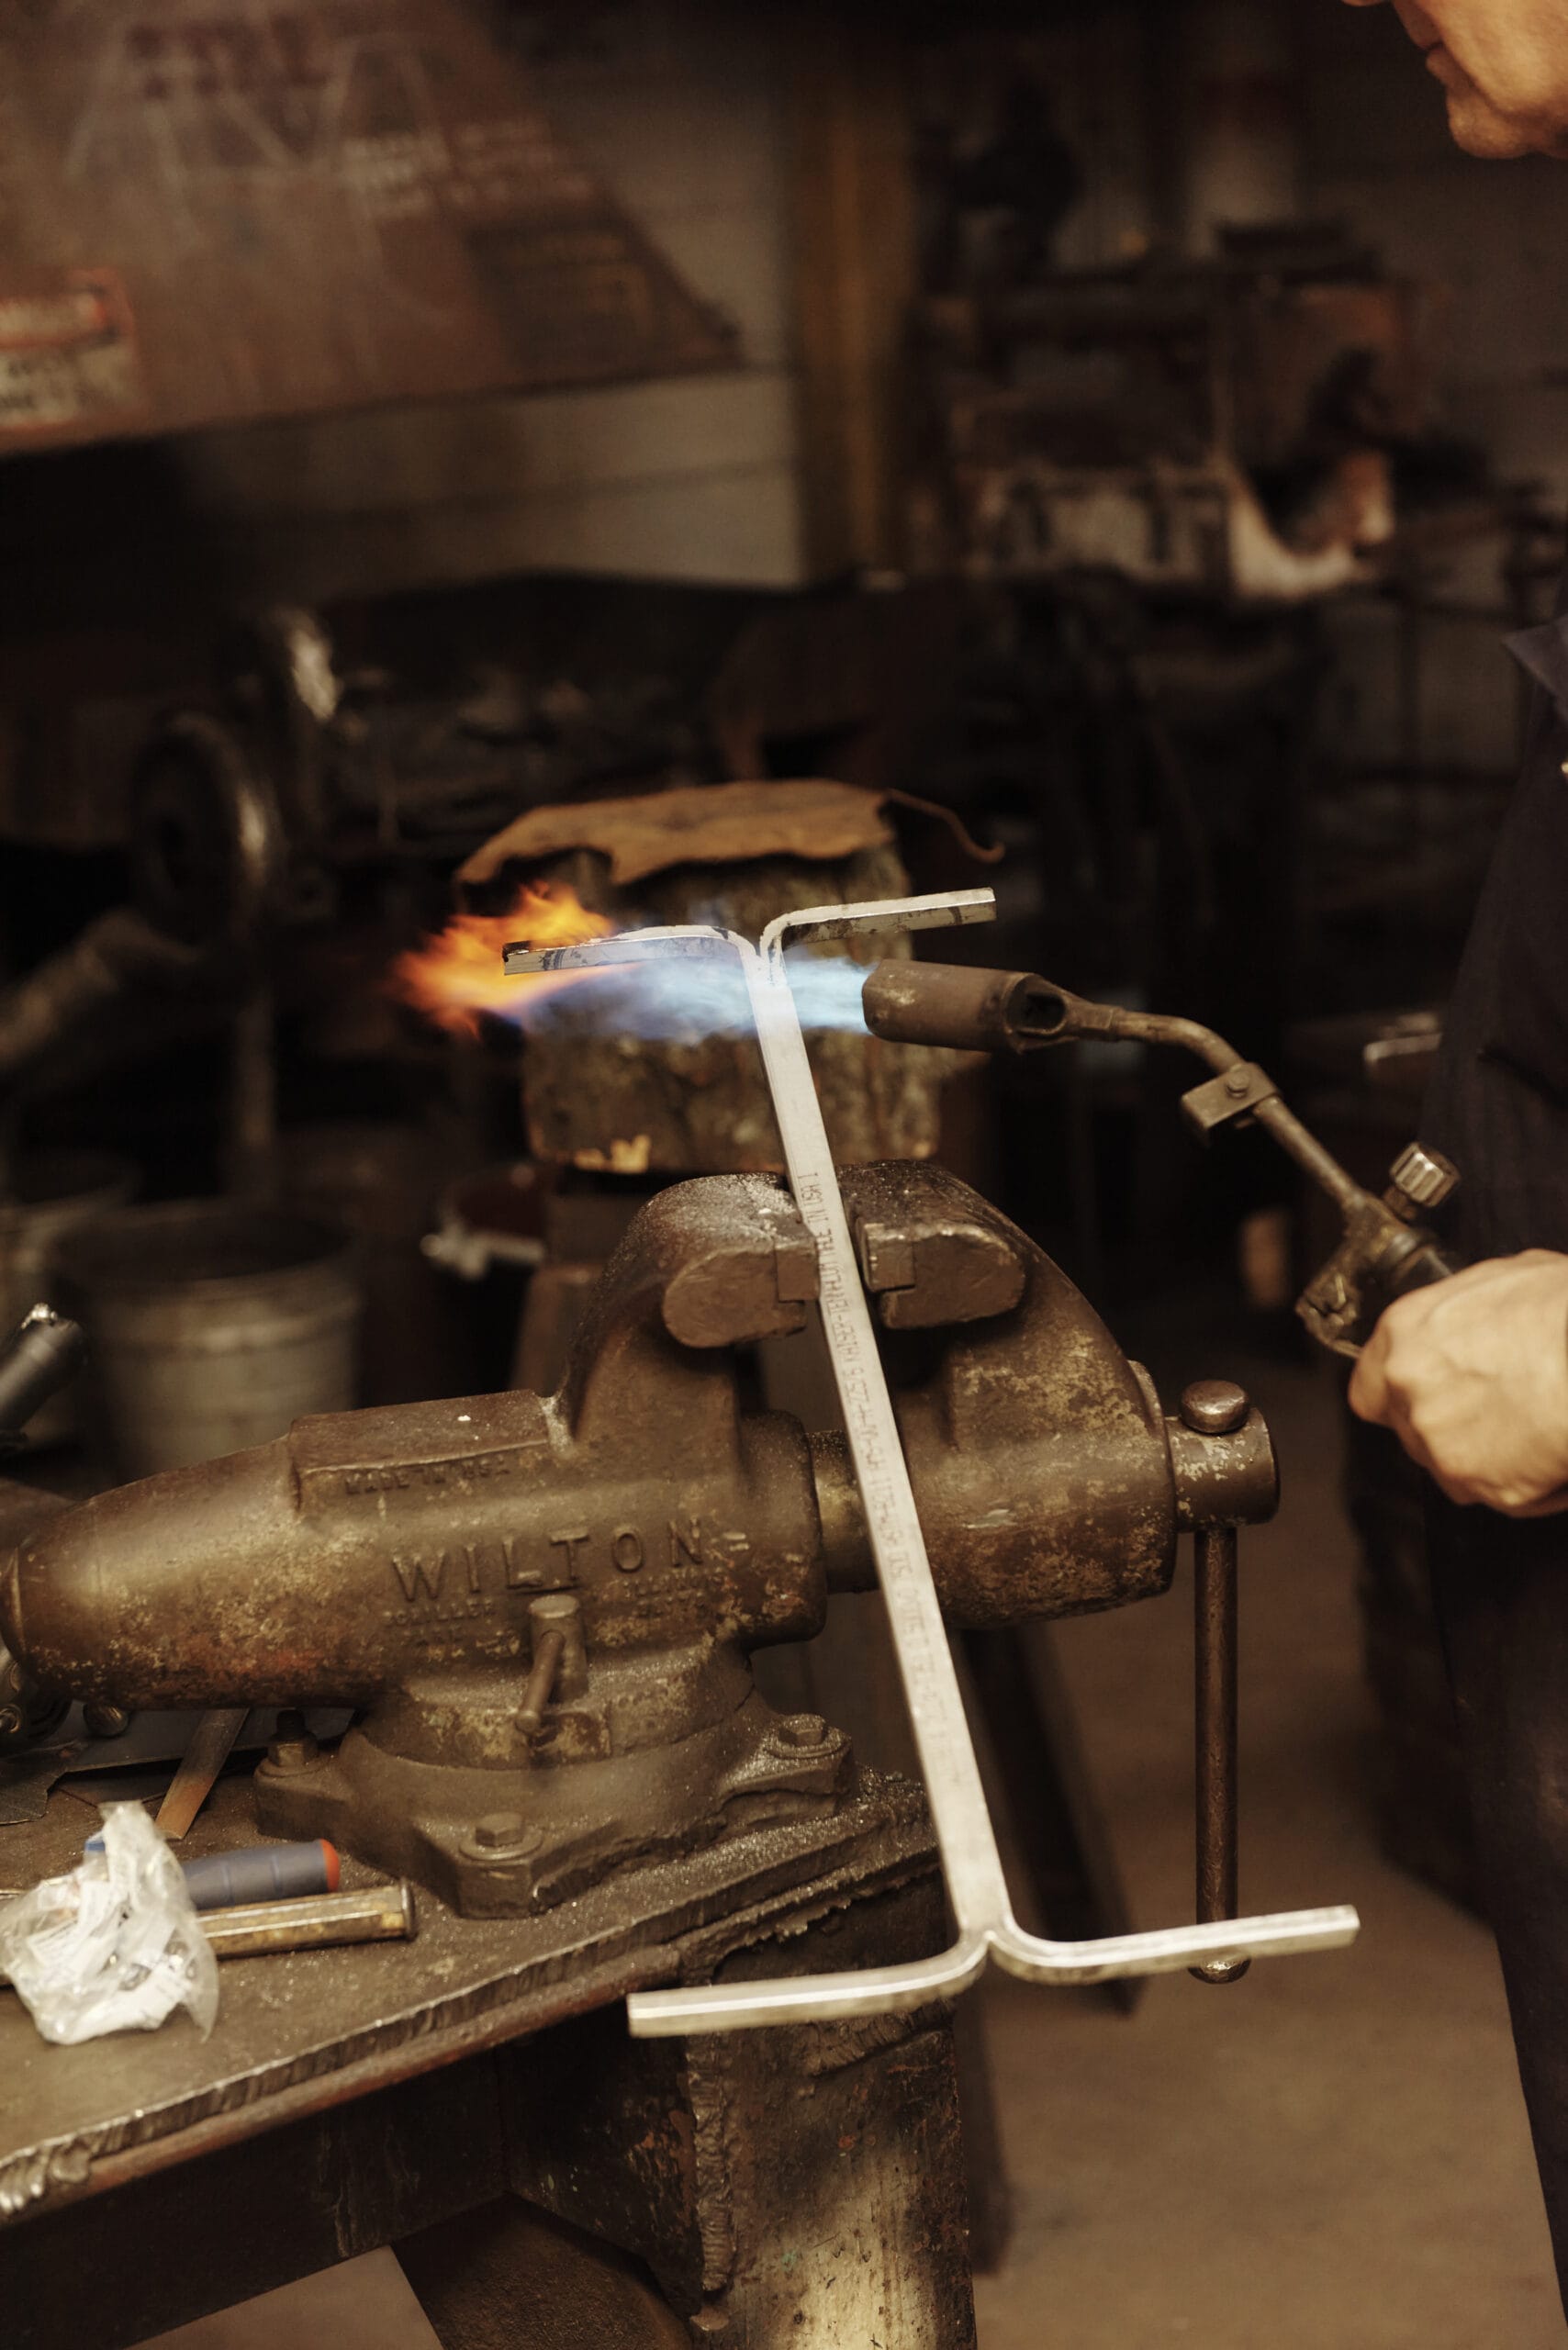 Student uses a blow torch to heat up metal in the Forge Area of the Metal Shop